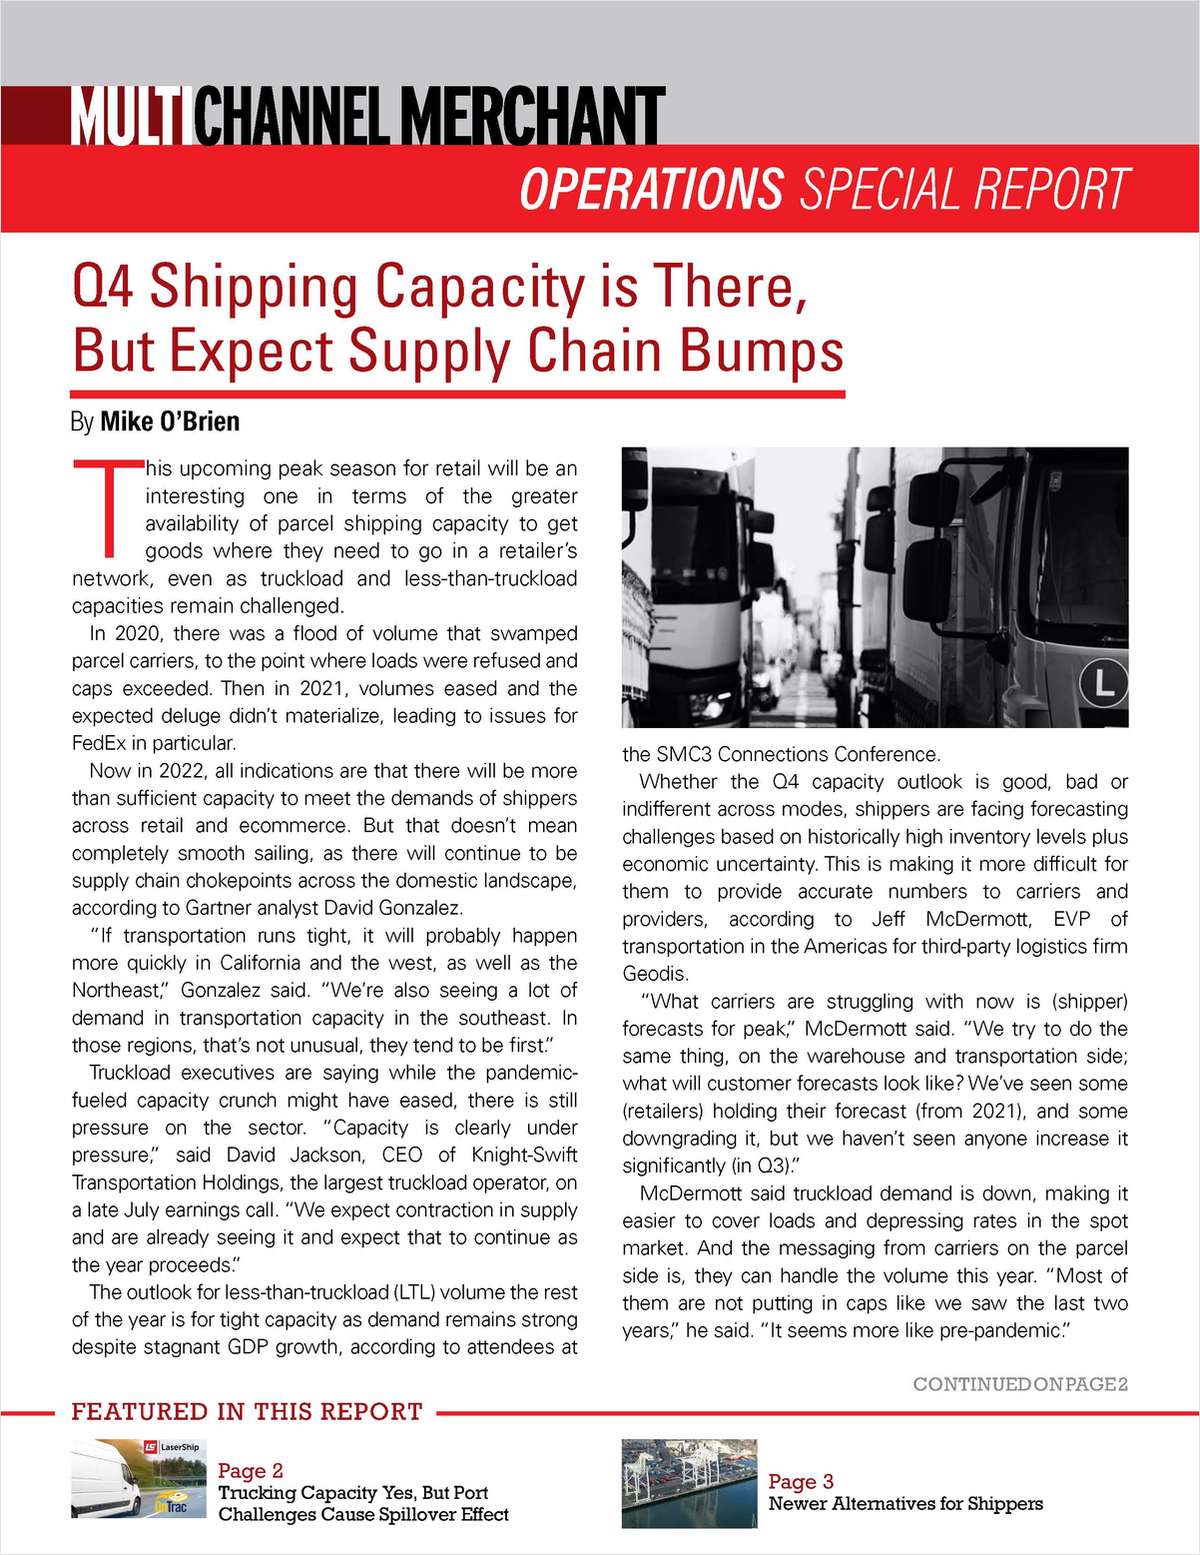 Shipping Capacity Management: The Outlook for 2022 Peak